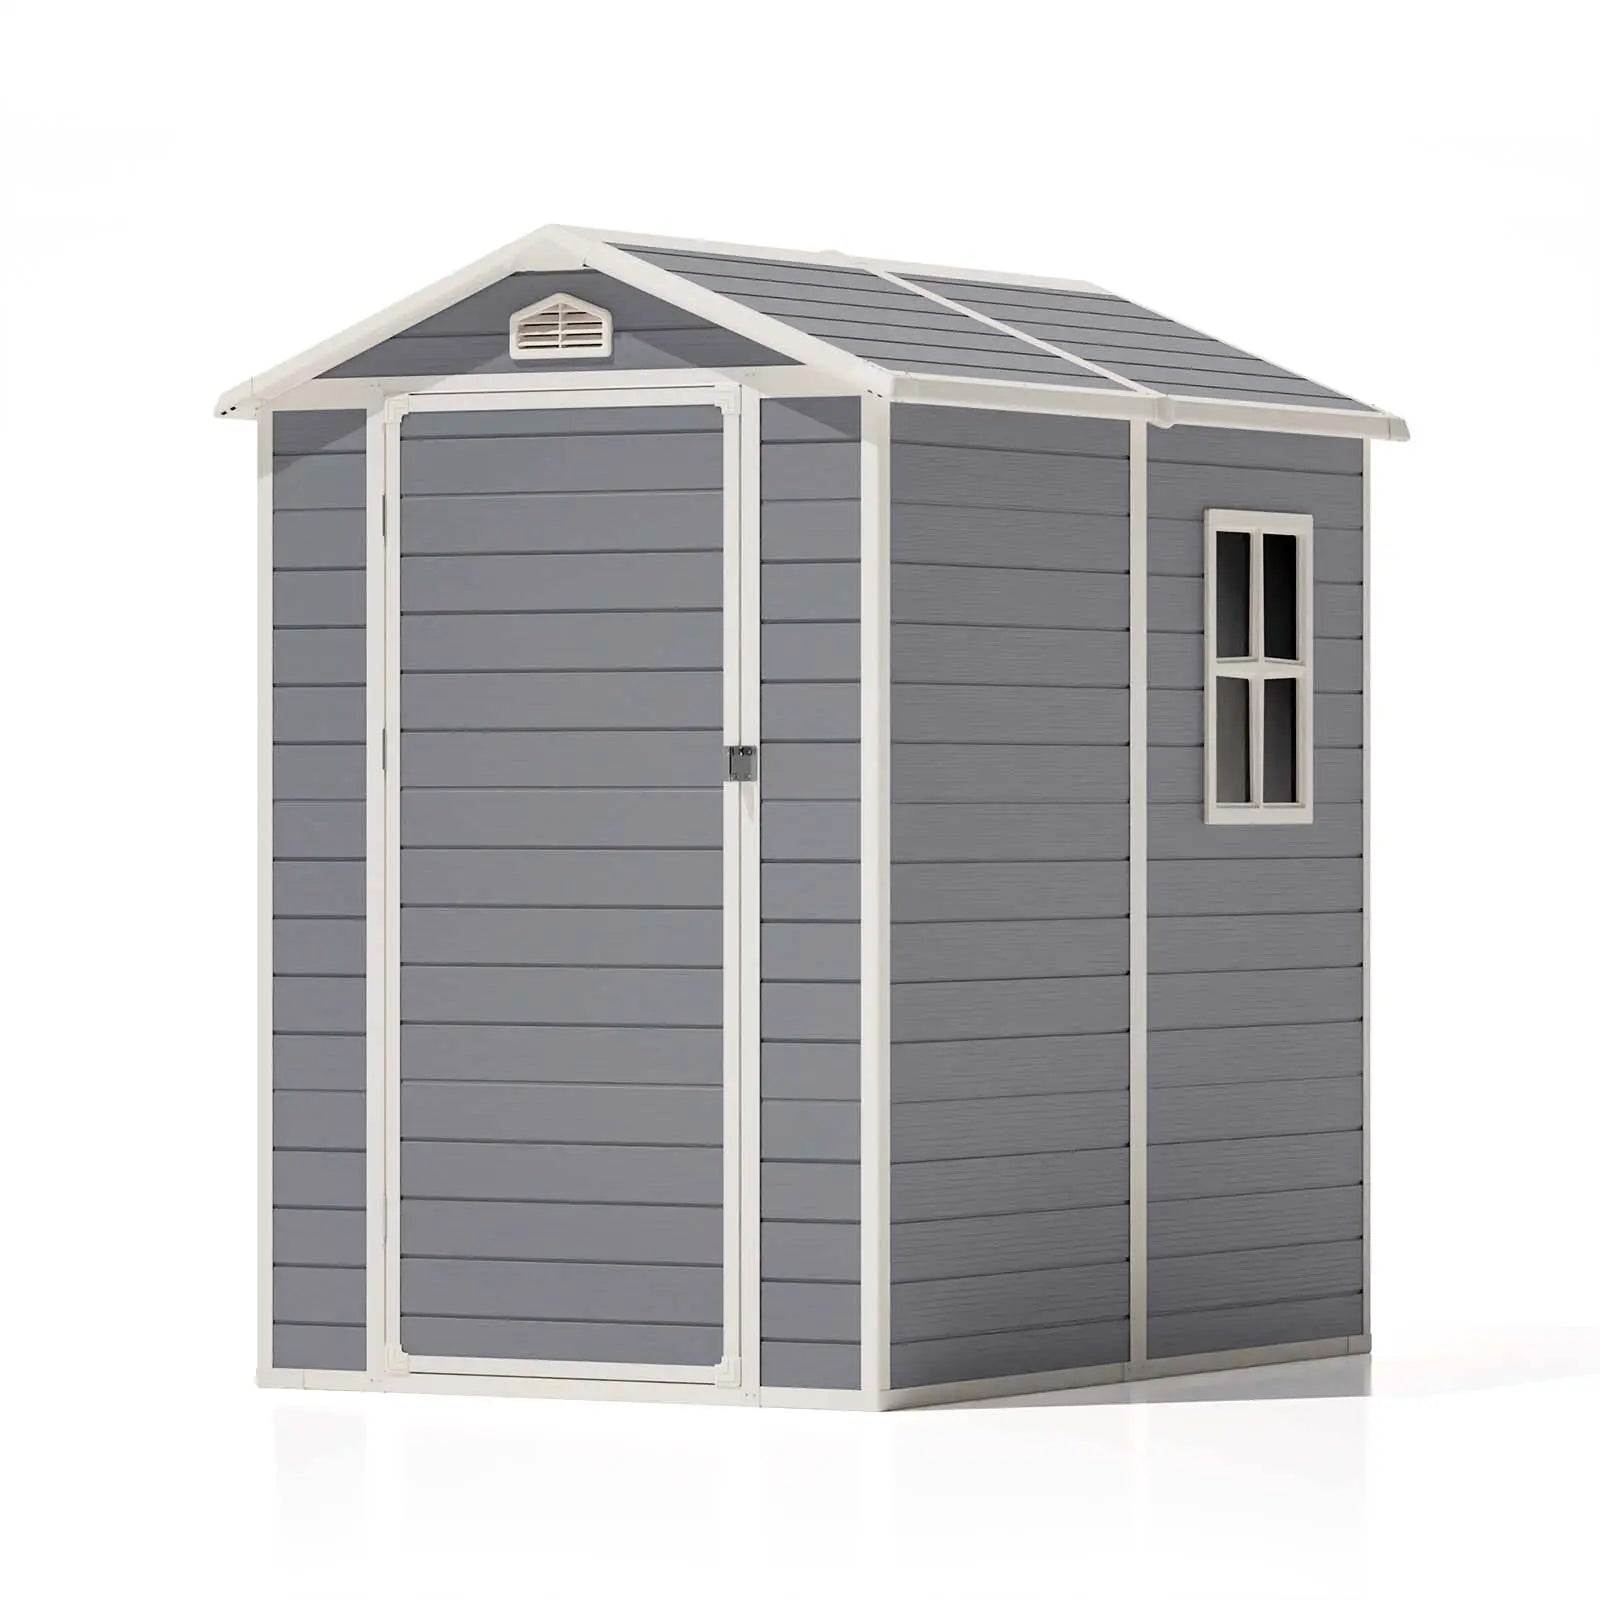 Patiowell 4x6 Plastic Shed Pro-1